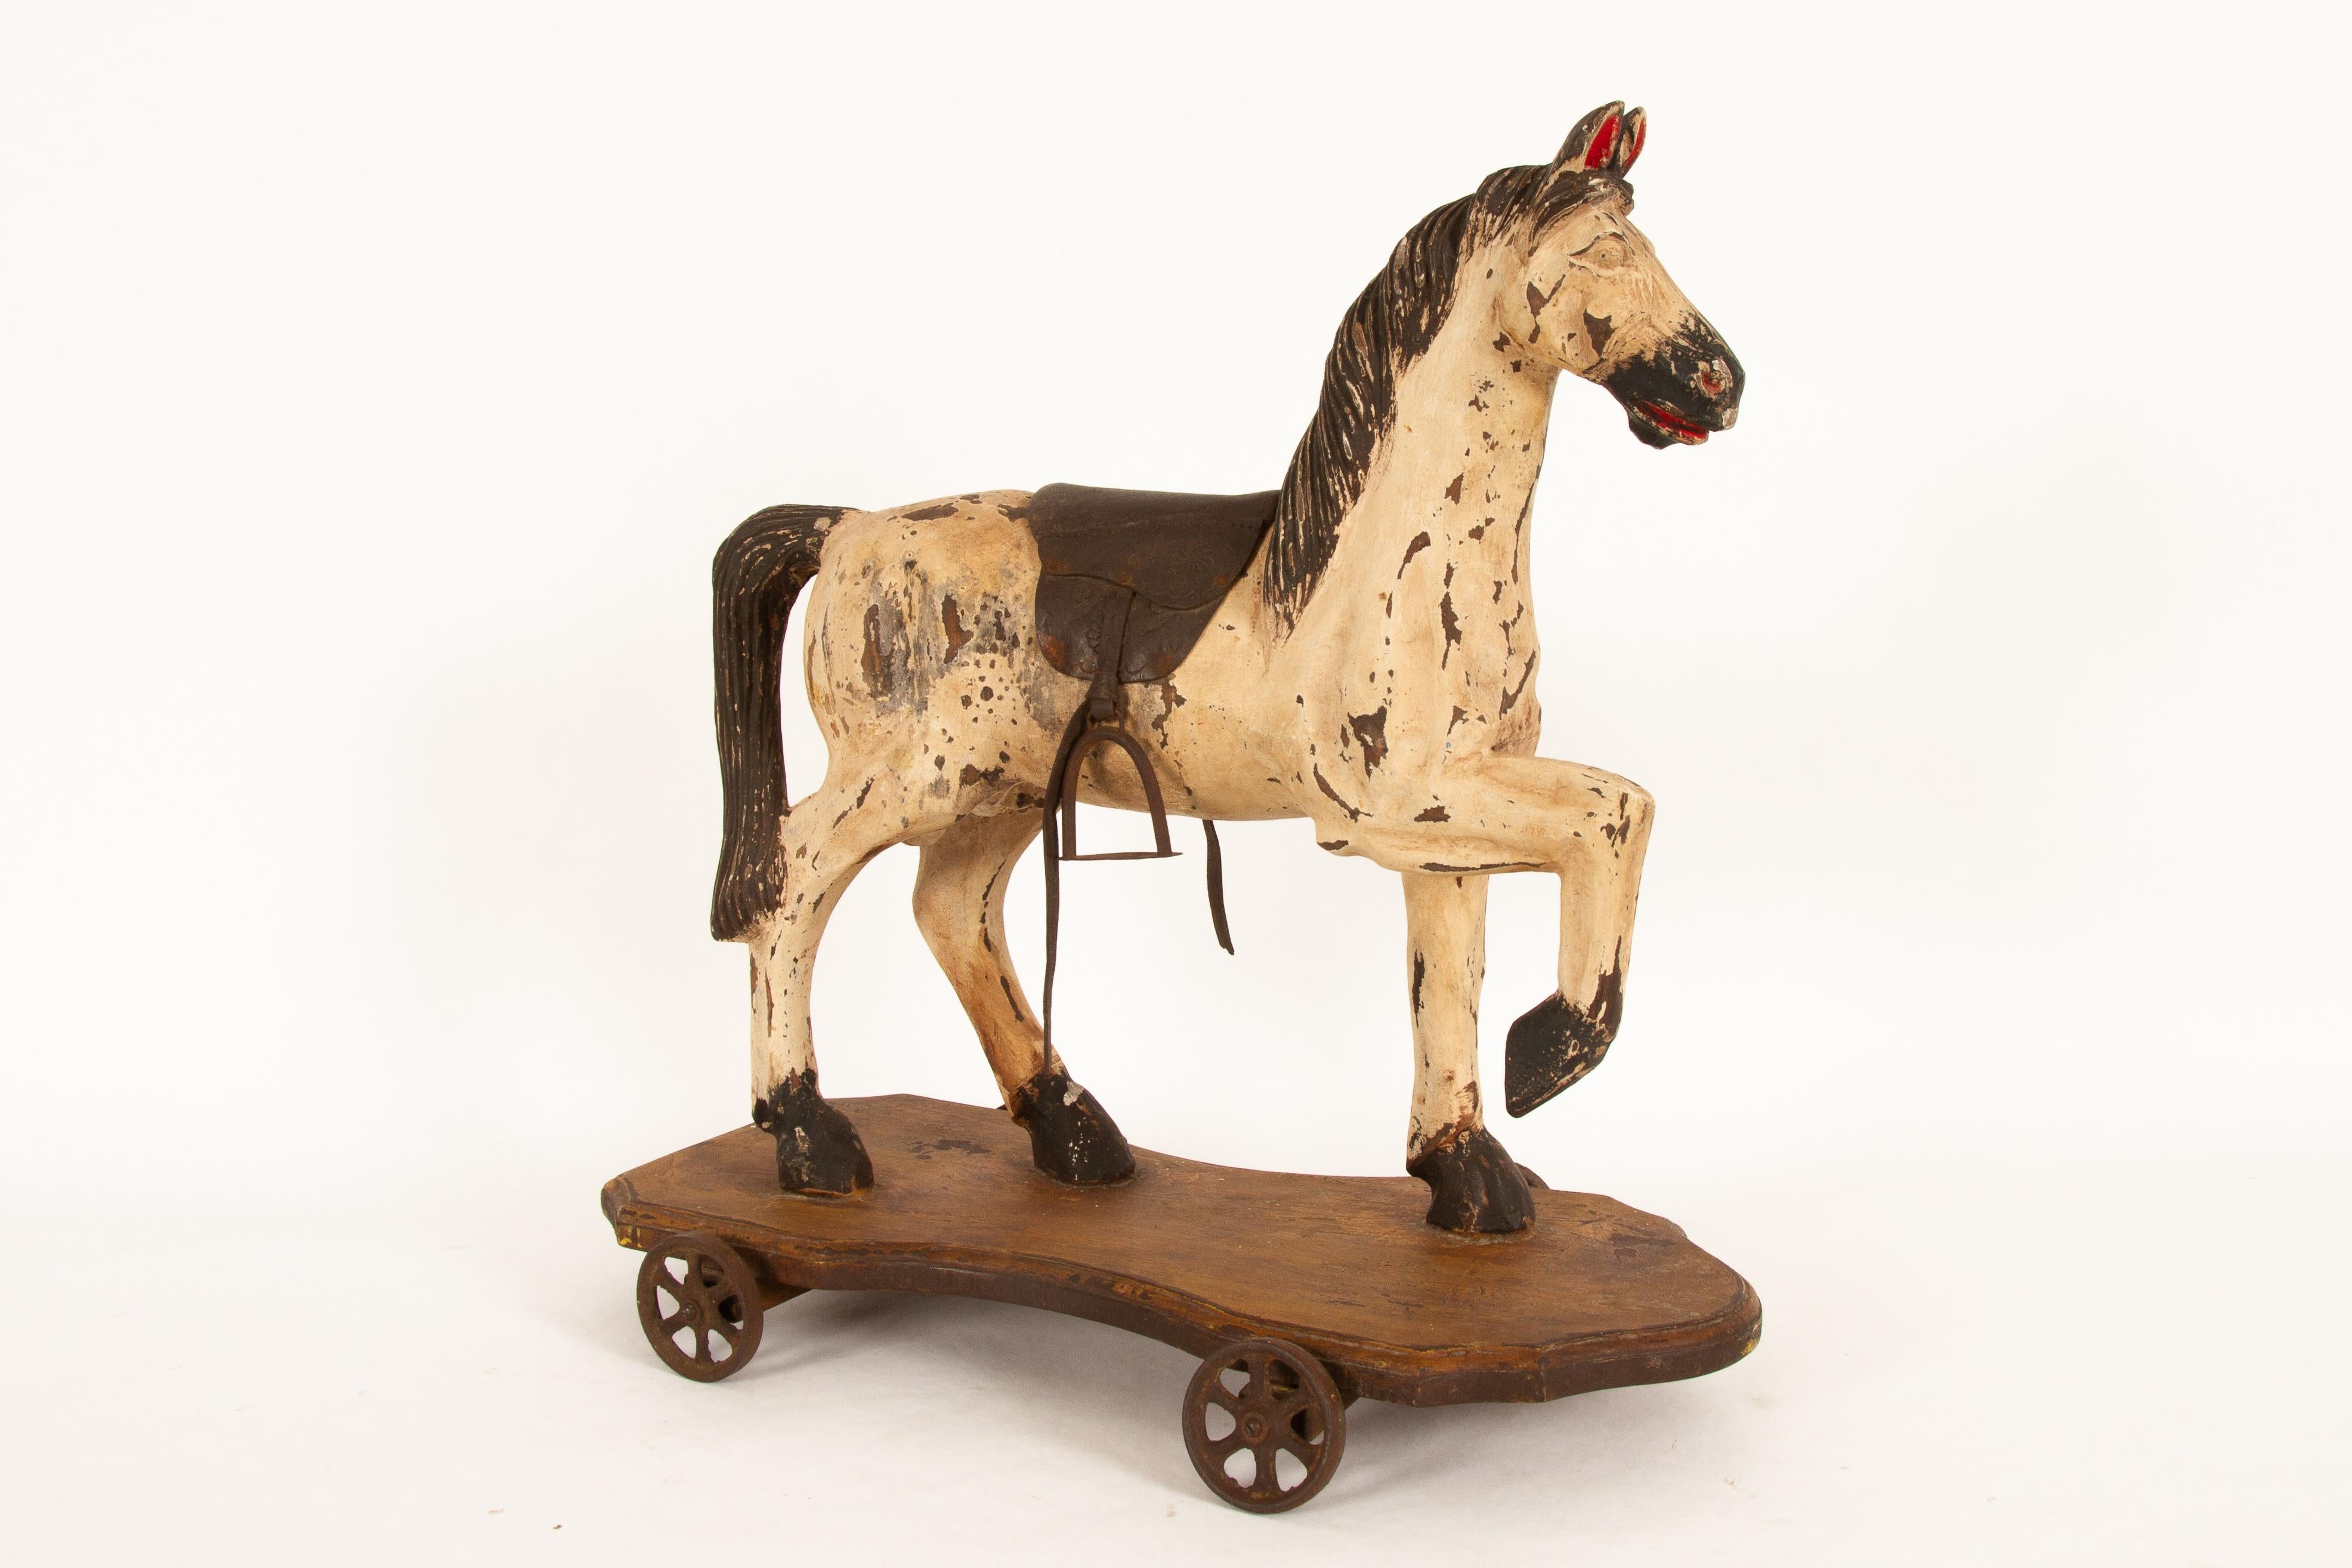 Arts and Crafts Antique Toy Horse, 1880s